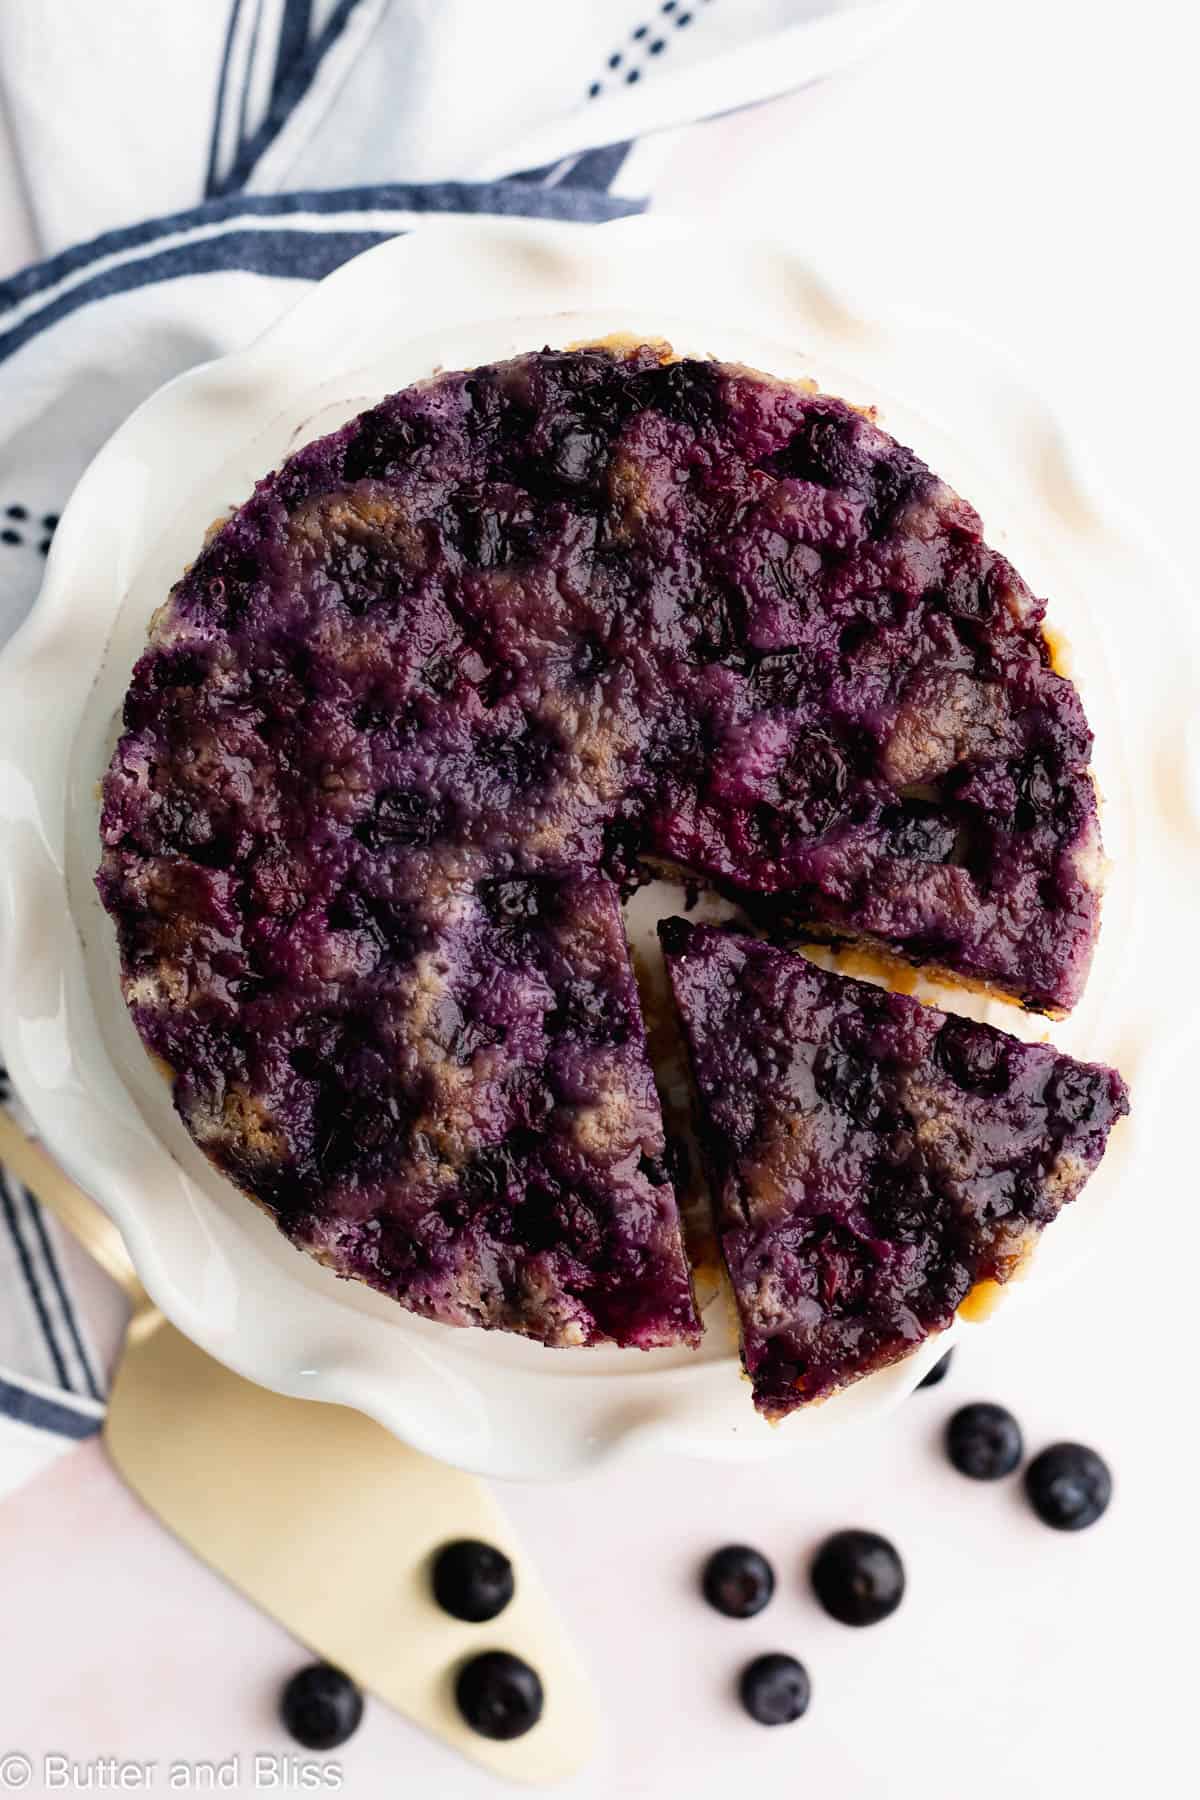 Top of a blueberry upside down cake on a cake platter with tons of jammy blueberries.